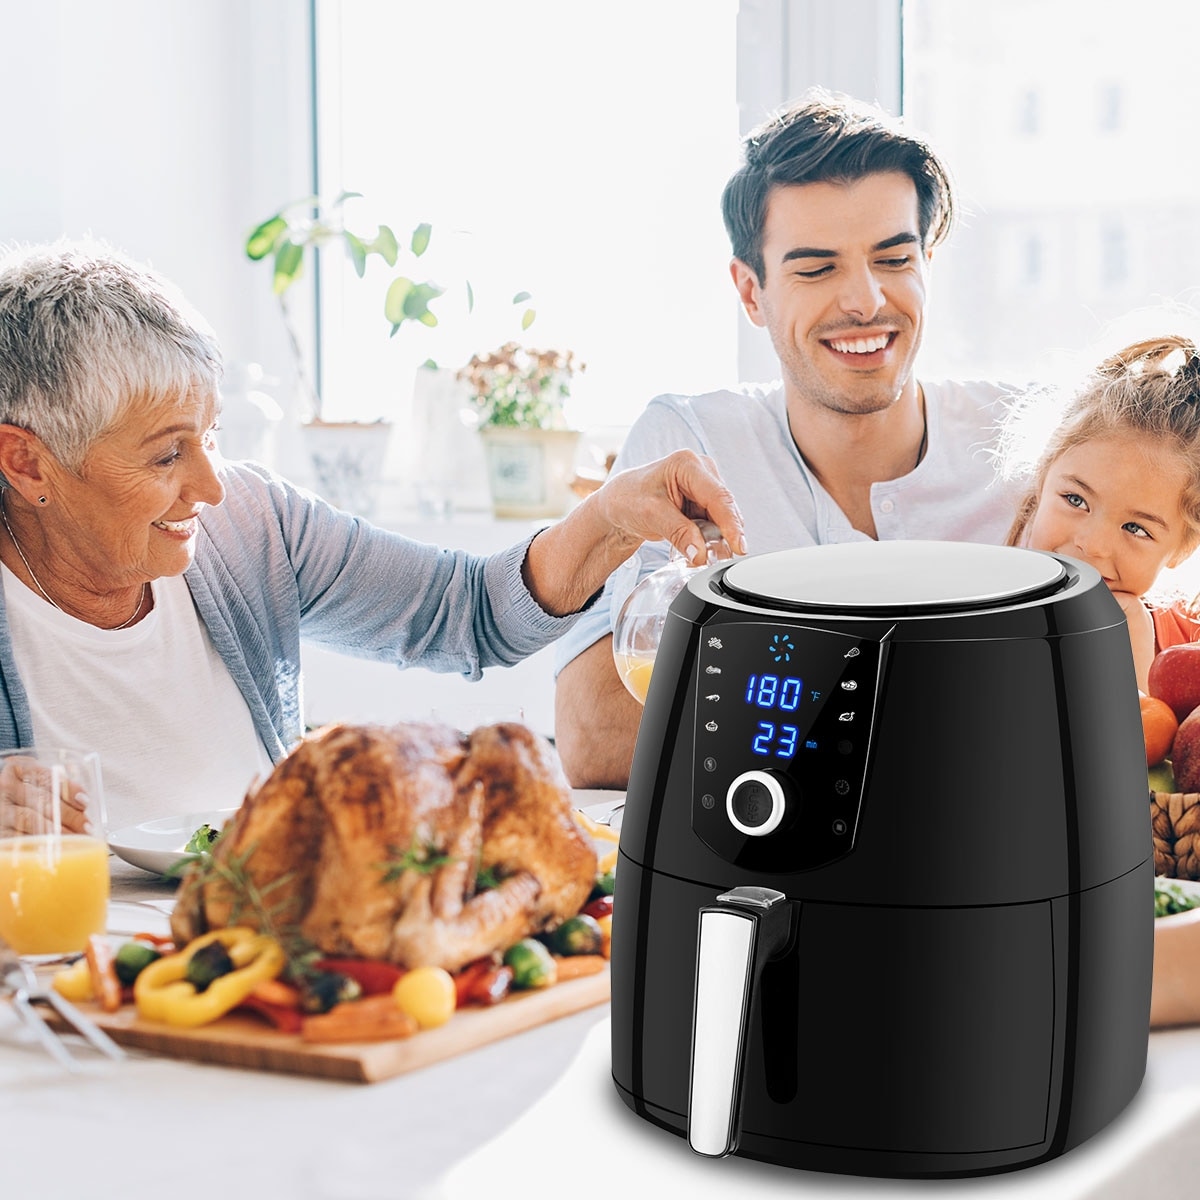 https://ak1.ostkcdn.com/images/products/is/images/direct/a77216b68209ba23c98a0eee115a6375f9750409/Costway-Digital-Air-Fryer-1800W-5.5QT-Oil-Free-Touchscreen-Timer-Temperature-Control.jpg